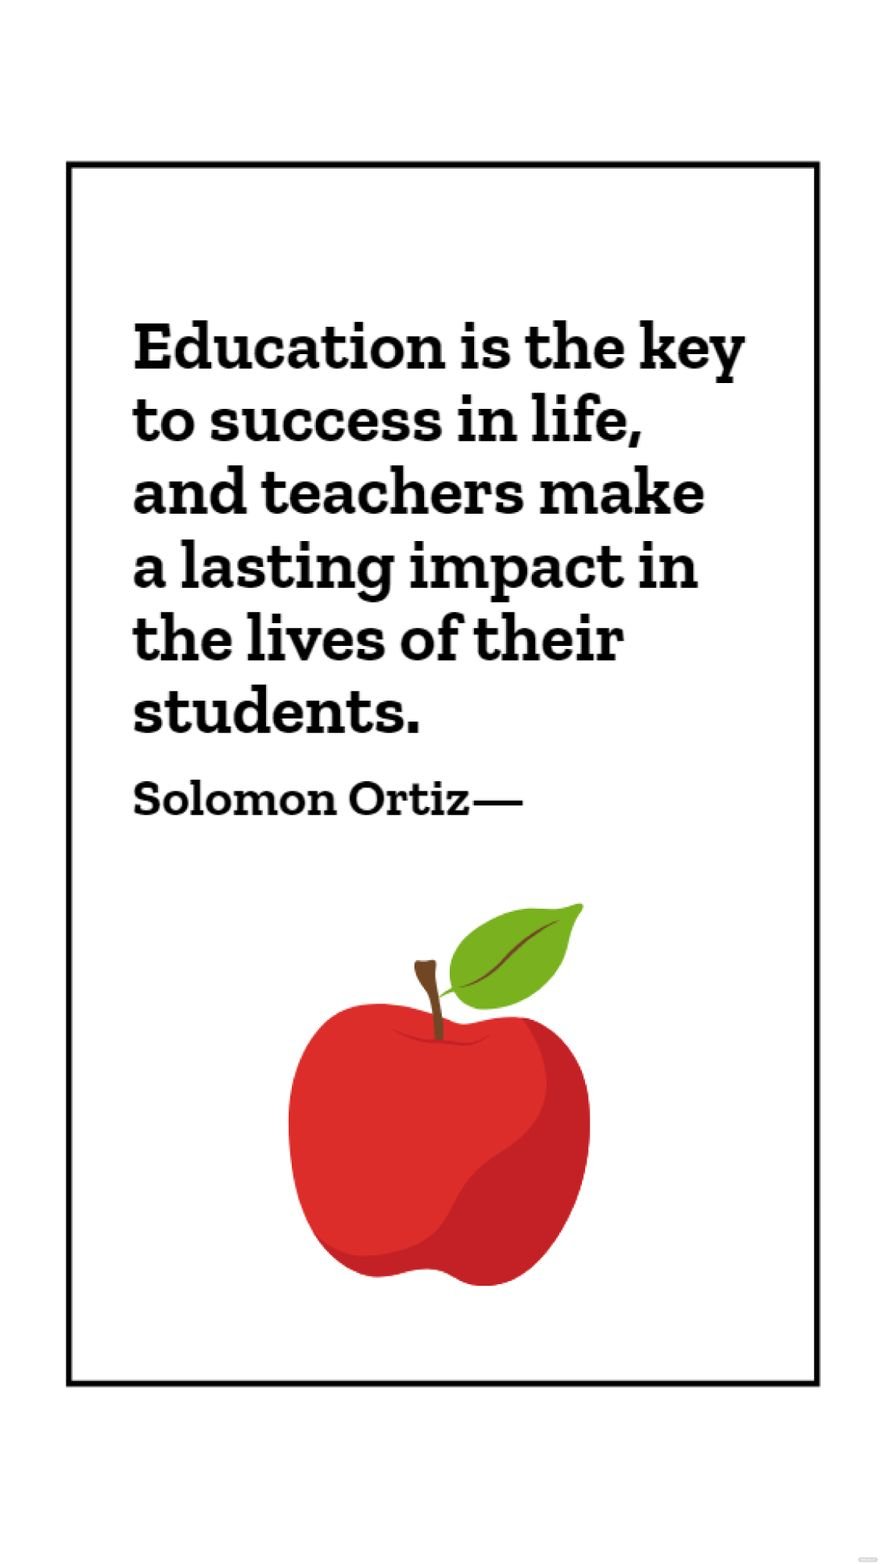 Solomon Ortiz - Education is the key to success in life, and teachers make a lasting impact in the lives of their students.